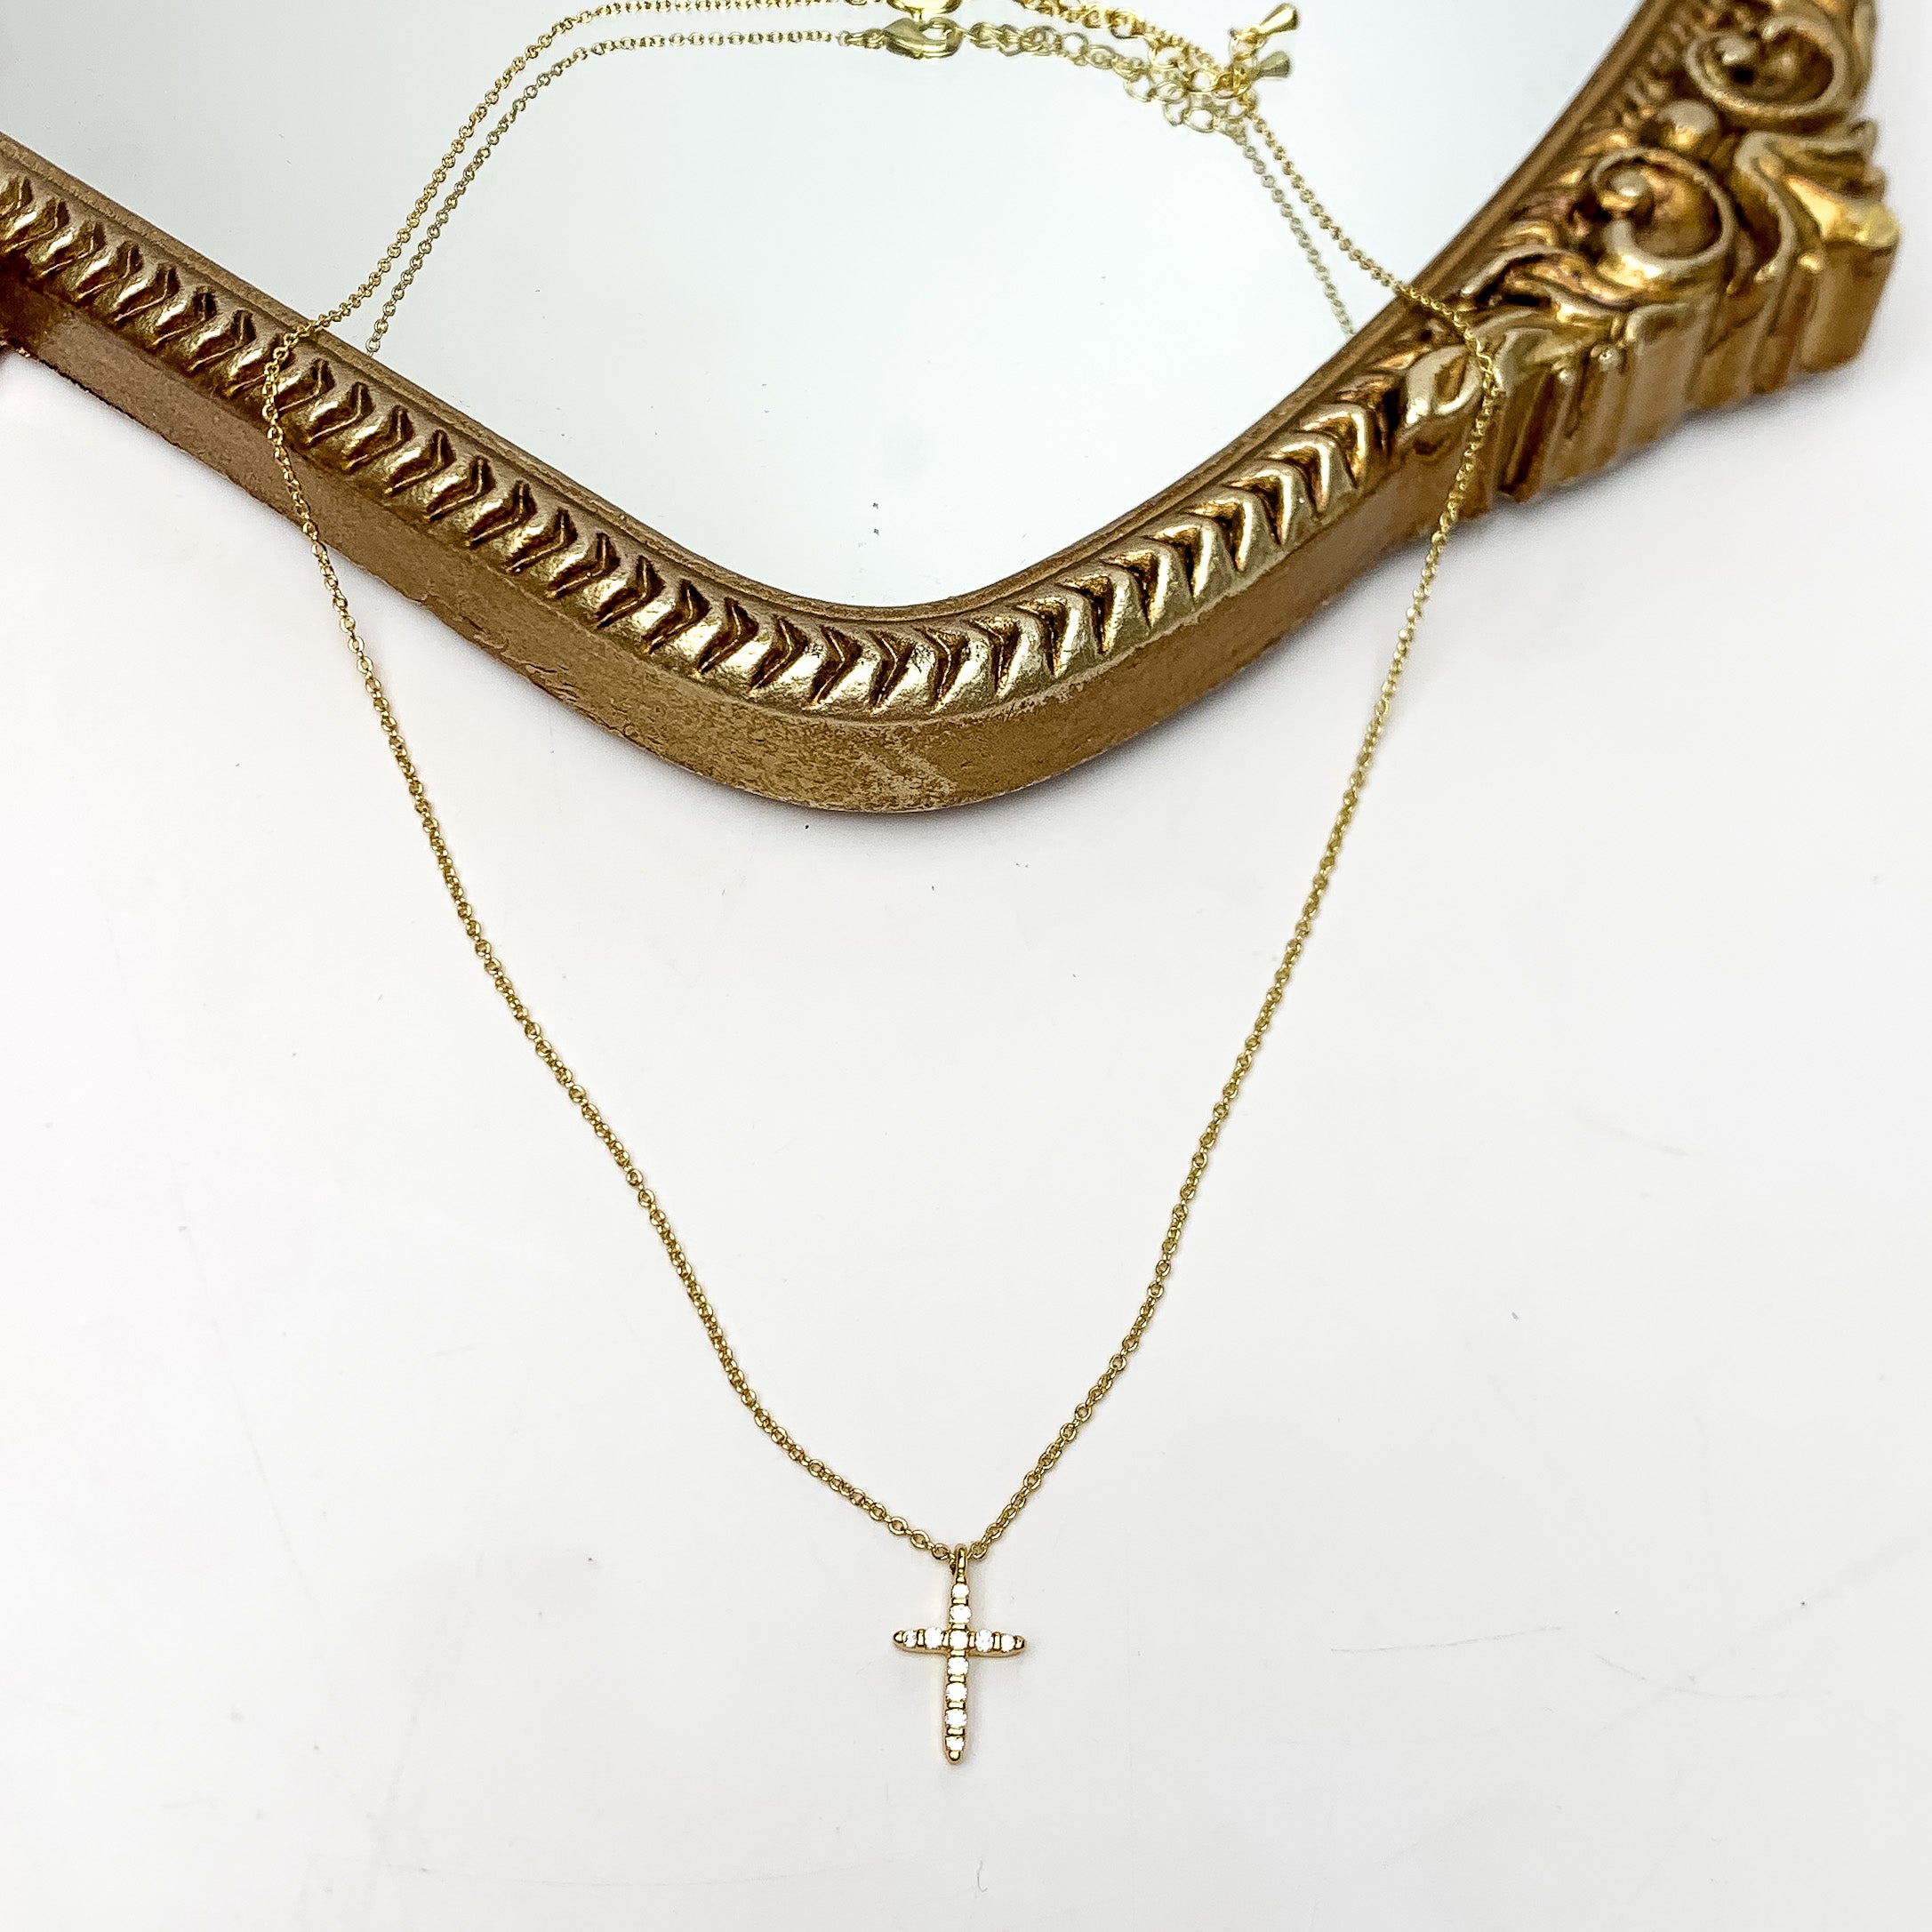 Gold Tone Glory Chain Necklace With Clear Crystal Cross. This necklace is pictured on a white background with part of it on a gold trimmed mirror.